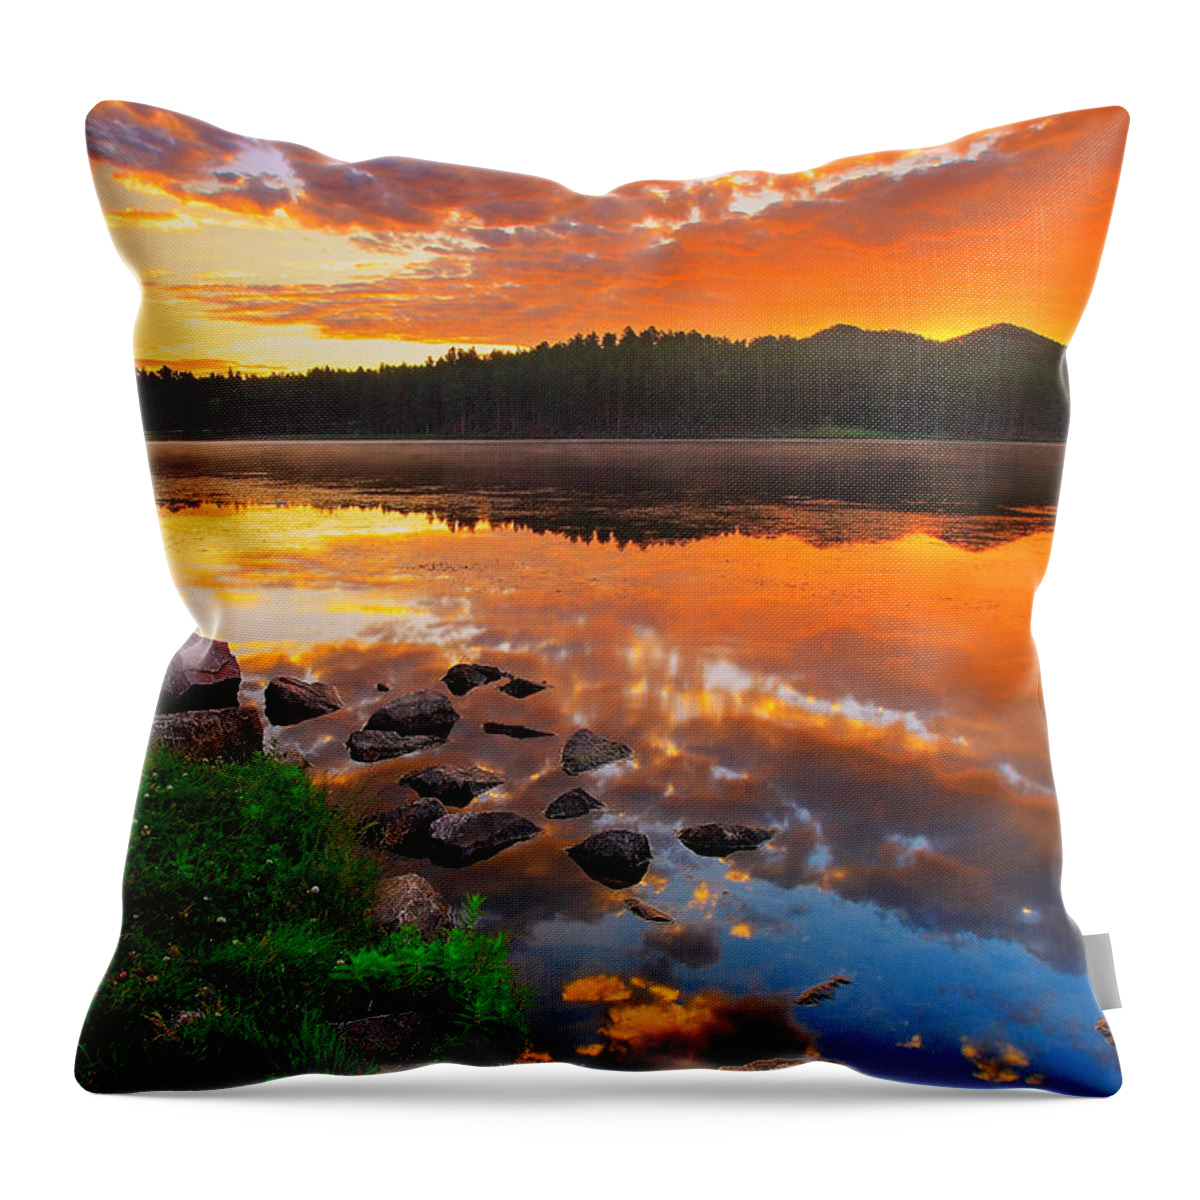 Beauty Throw Pillow featuring the photograph Fire On Water by Kadek Susanto